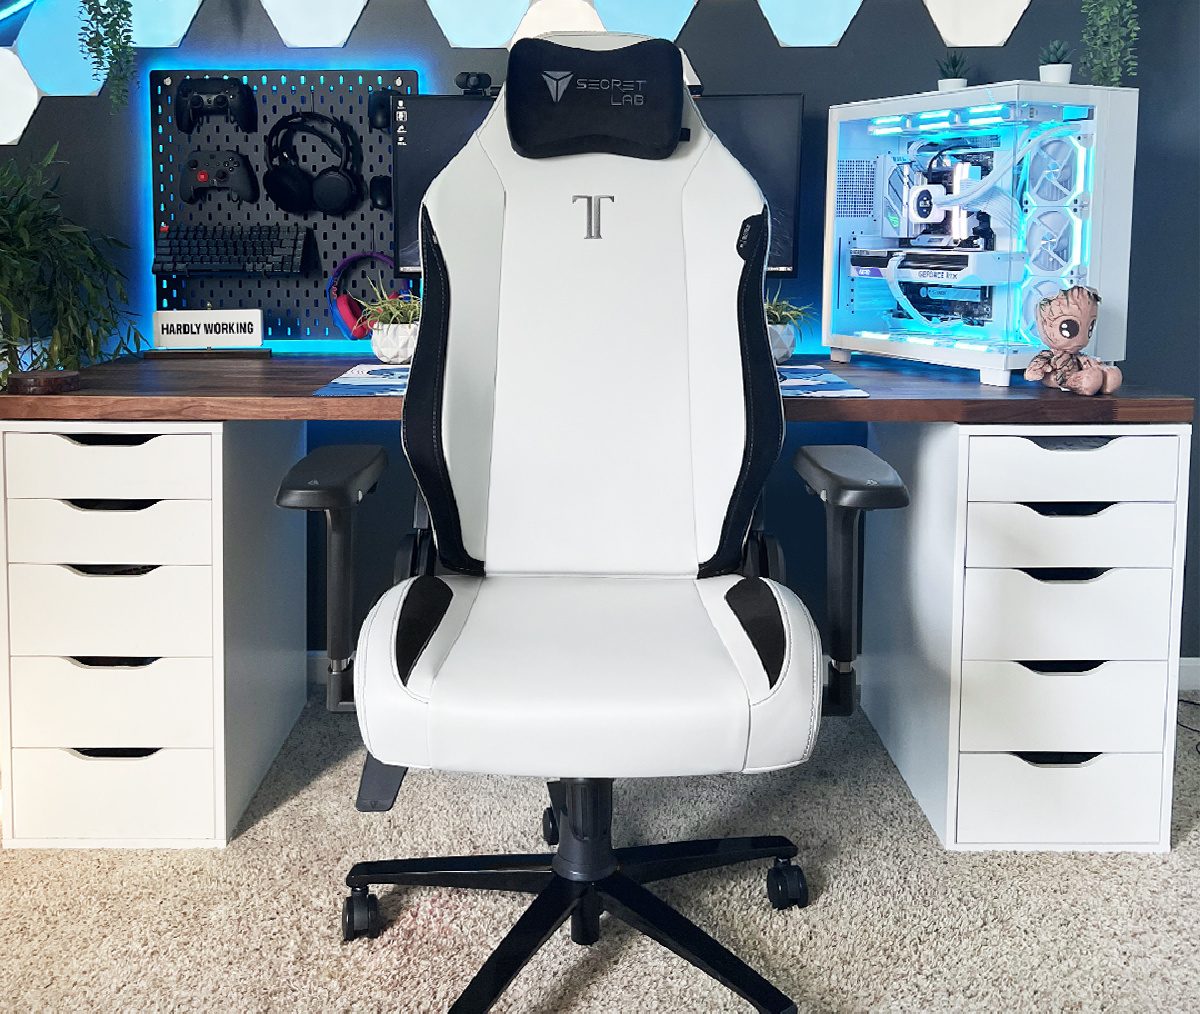 The best gaming chair on the market is the SecretLab TITAN Evo shown here in white